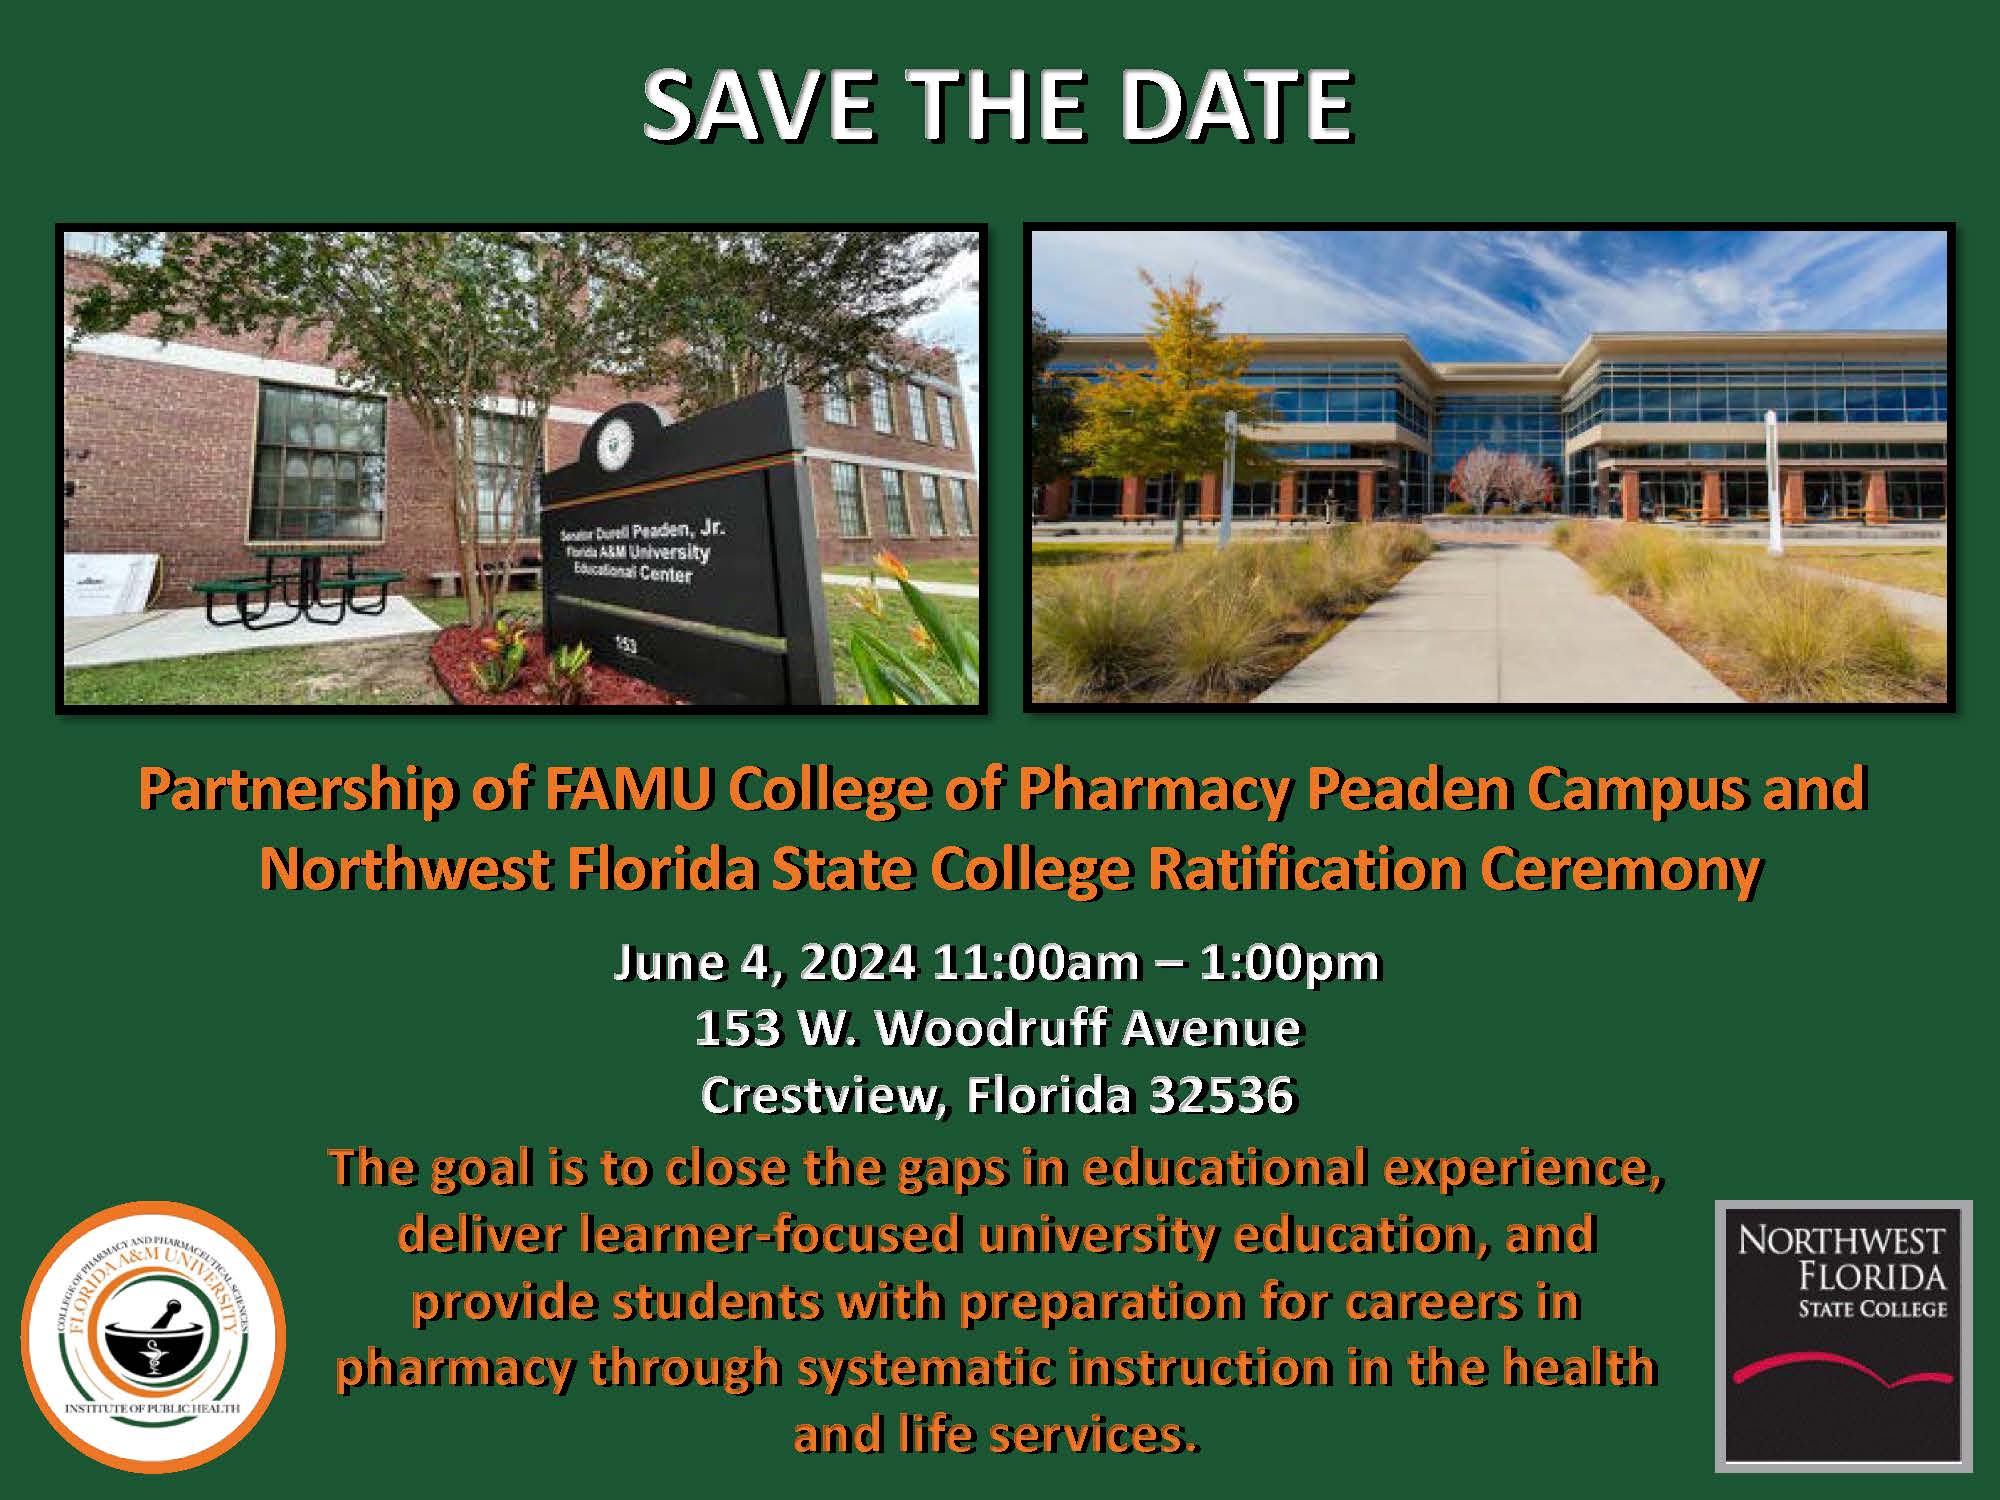 FAMU CoPPS IPH and NWFSC Partnership Ratification Ceremony In person invite